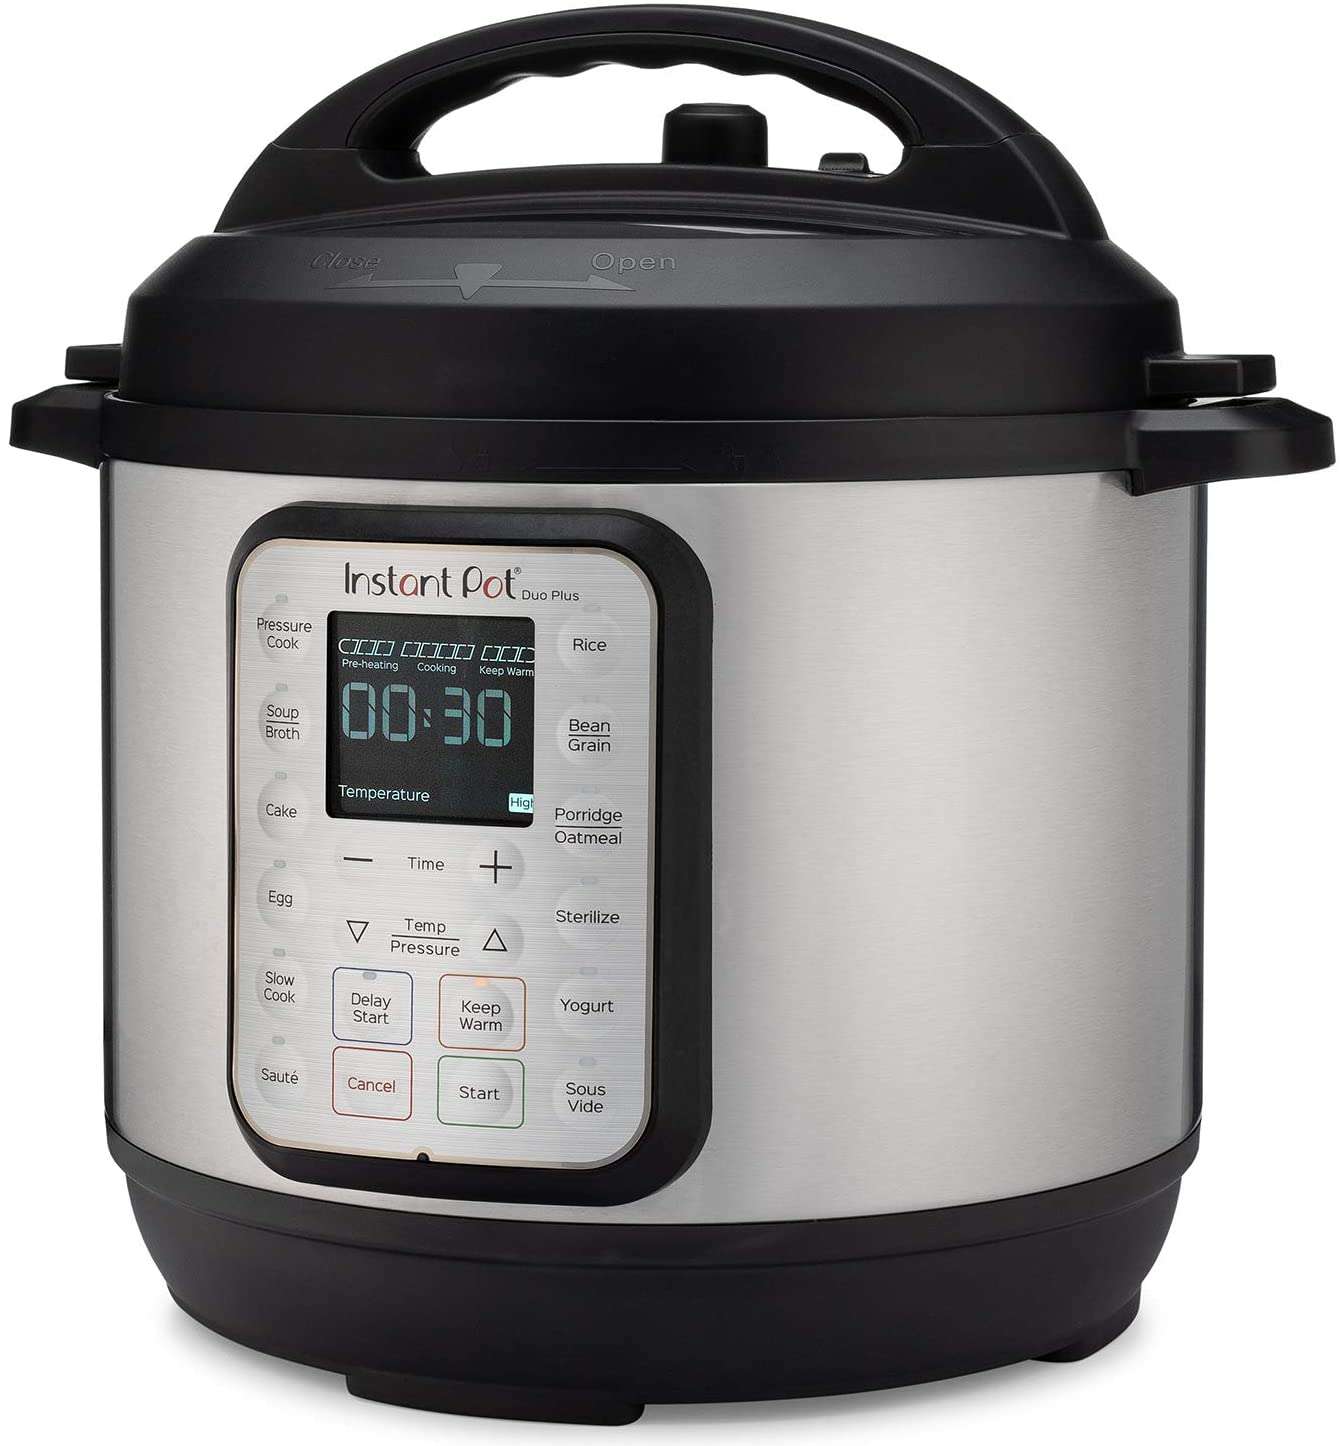 How to Use the Instant Pot Duo Plus